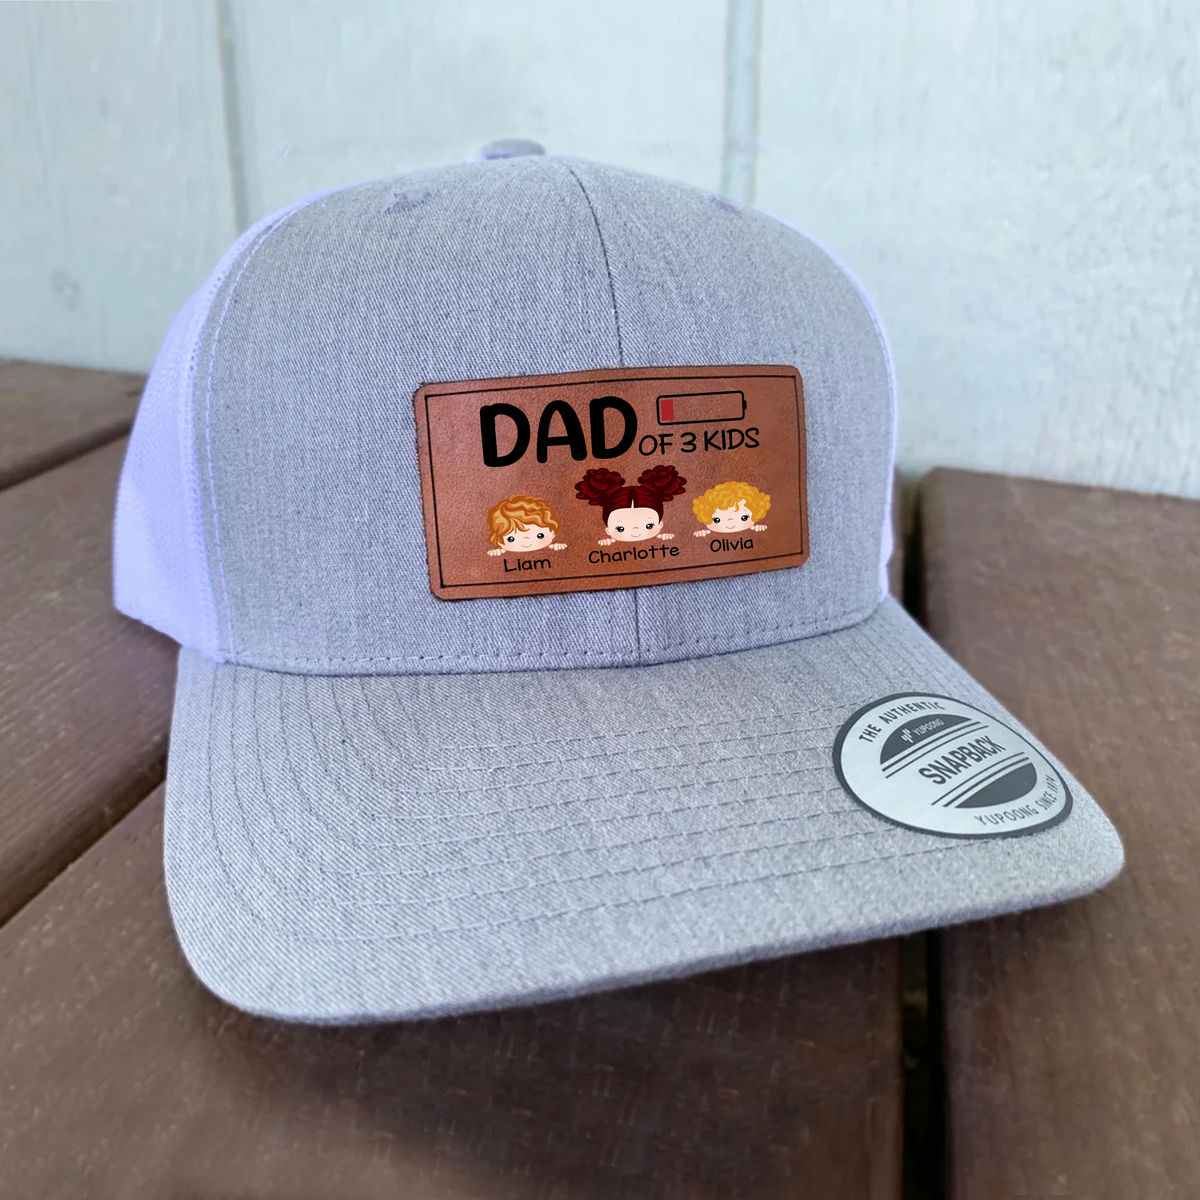 Dad Hats - Dad Of Kid - Personalized Cap Ver 2 - Gifts For Him, Dad, Family Members, Father's Day Gifts, Birthday, Xmas Gifts